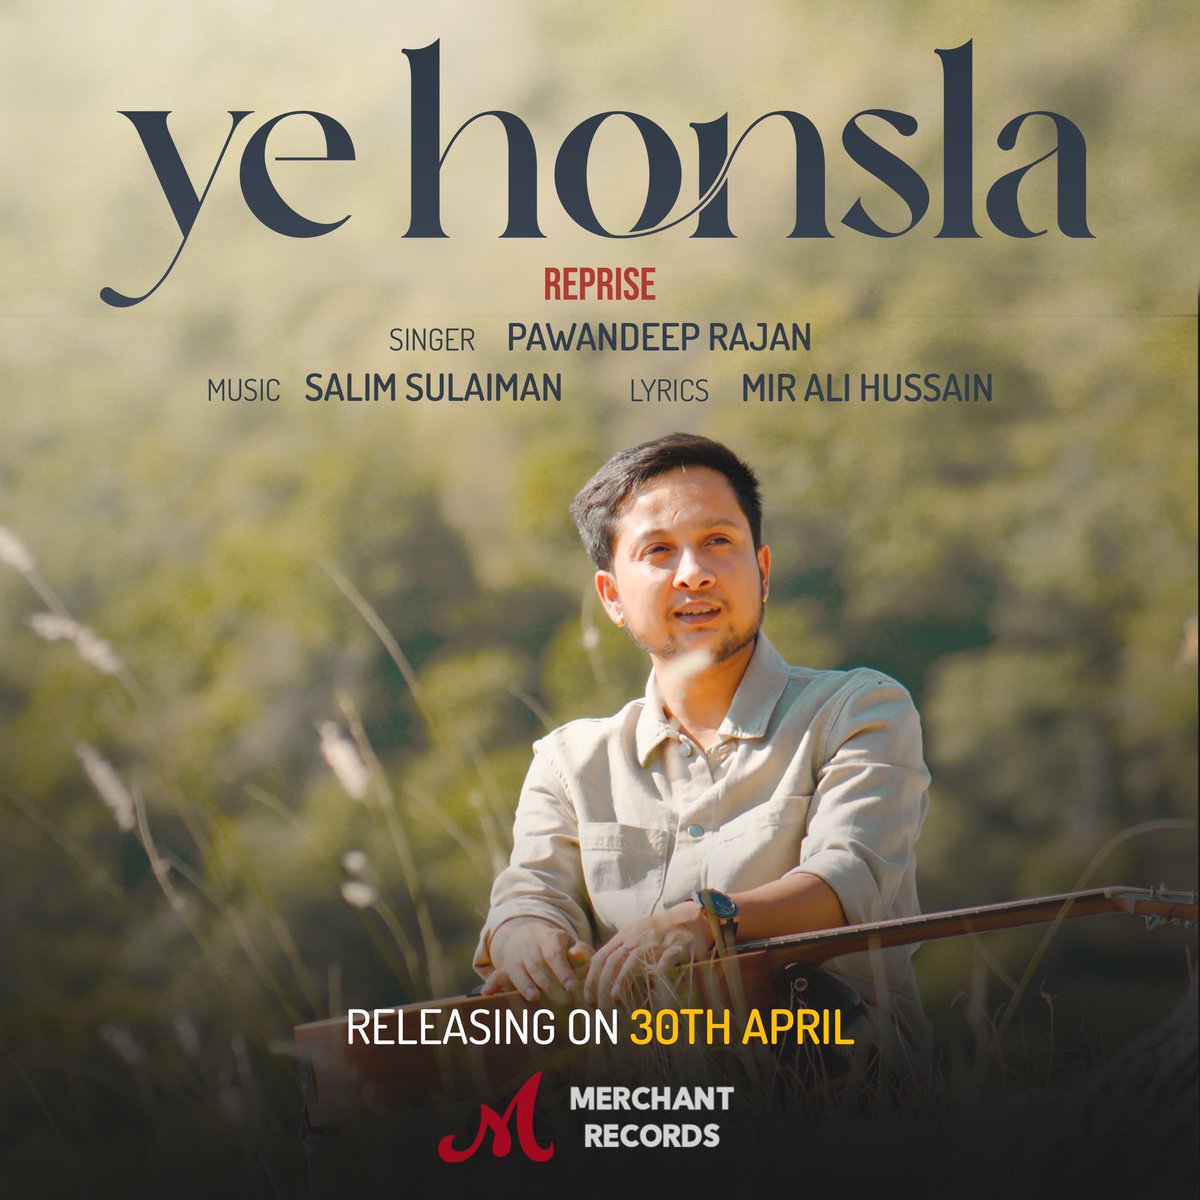 🎶Feel the soul-stirring magic of 'Yeh Honsla' as @pawandeeprajan9 heartfelt rendition fills the air. Join us April 30th on @SlimSulaiman’s YouTube for a journey of love and resilience. #YeHonsla #MerchantRecords #SalimSulaiman